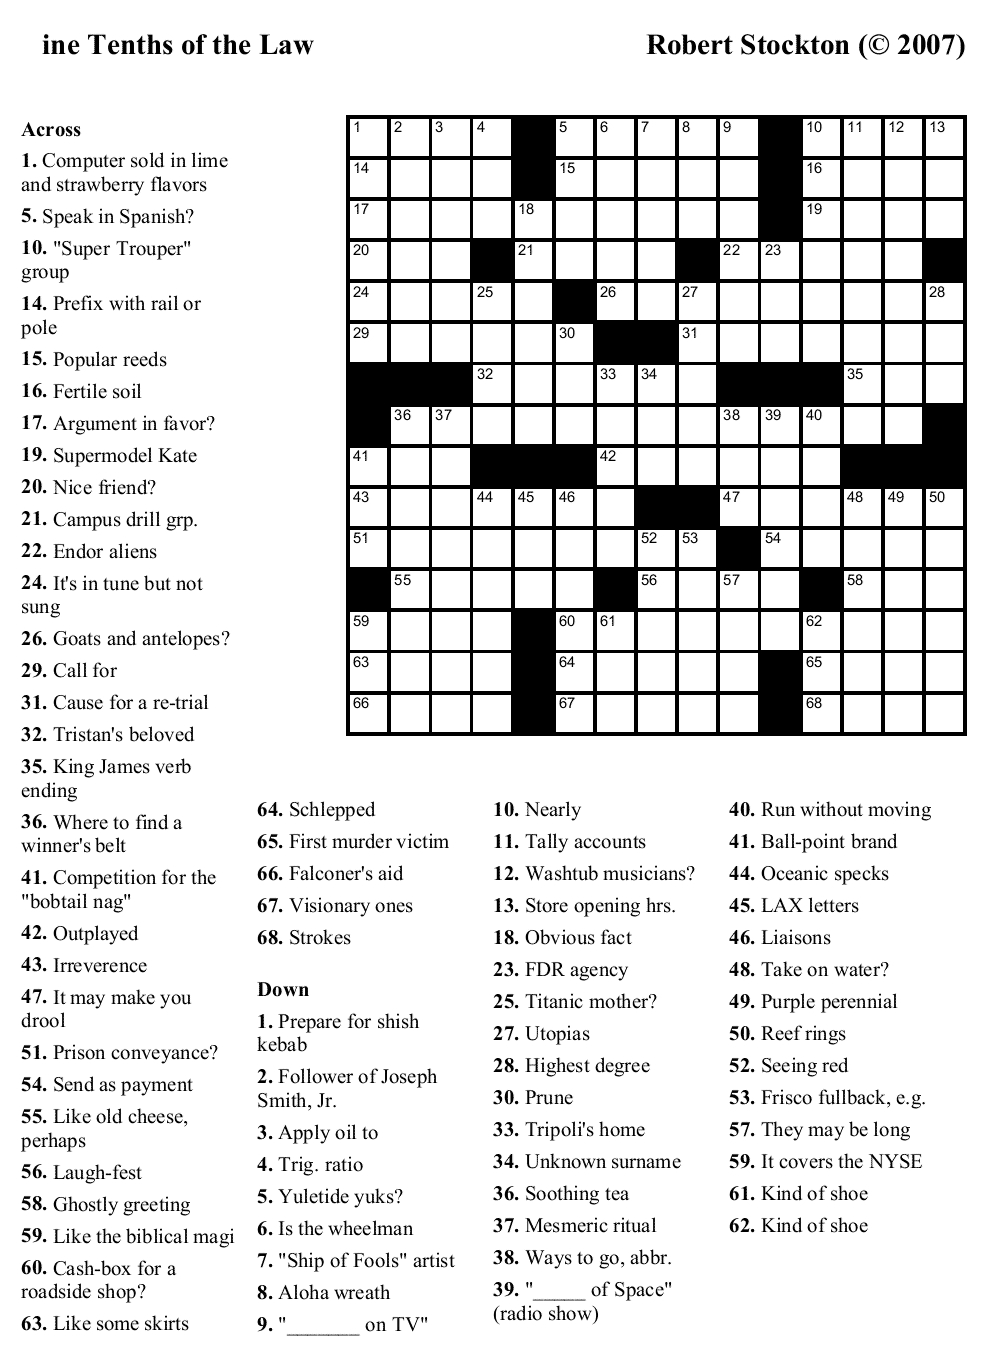 Crossword Puzzles Printable - Yahoo Image Search Results | Crossword - Printable Crossword Puzzles May 2018